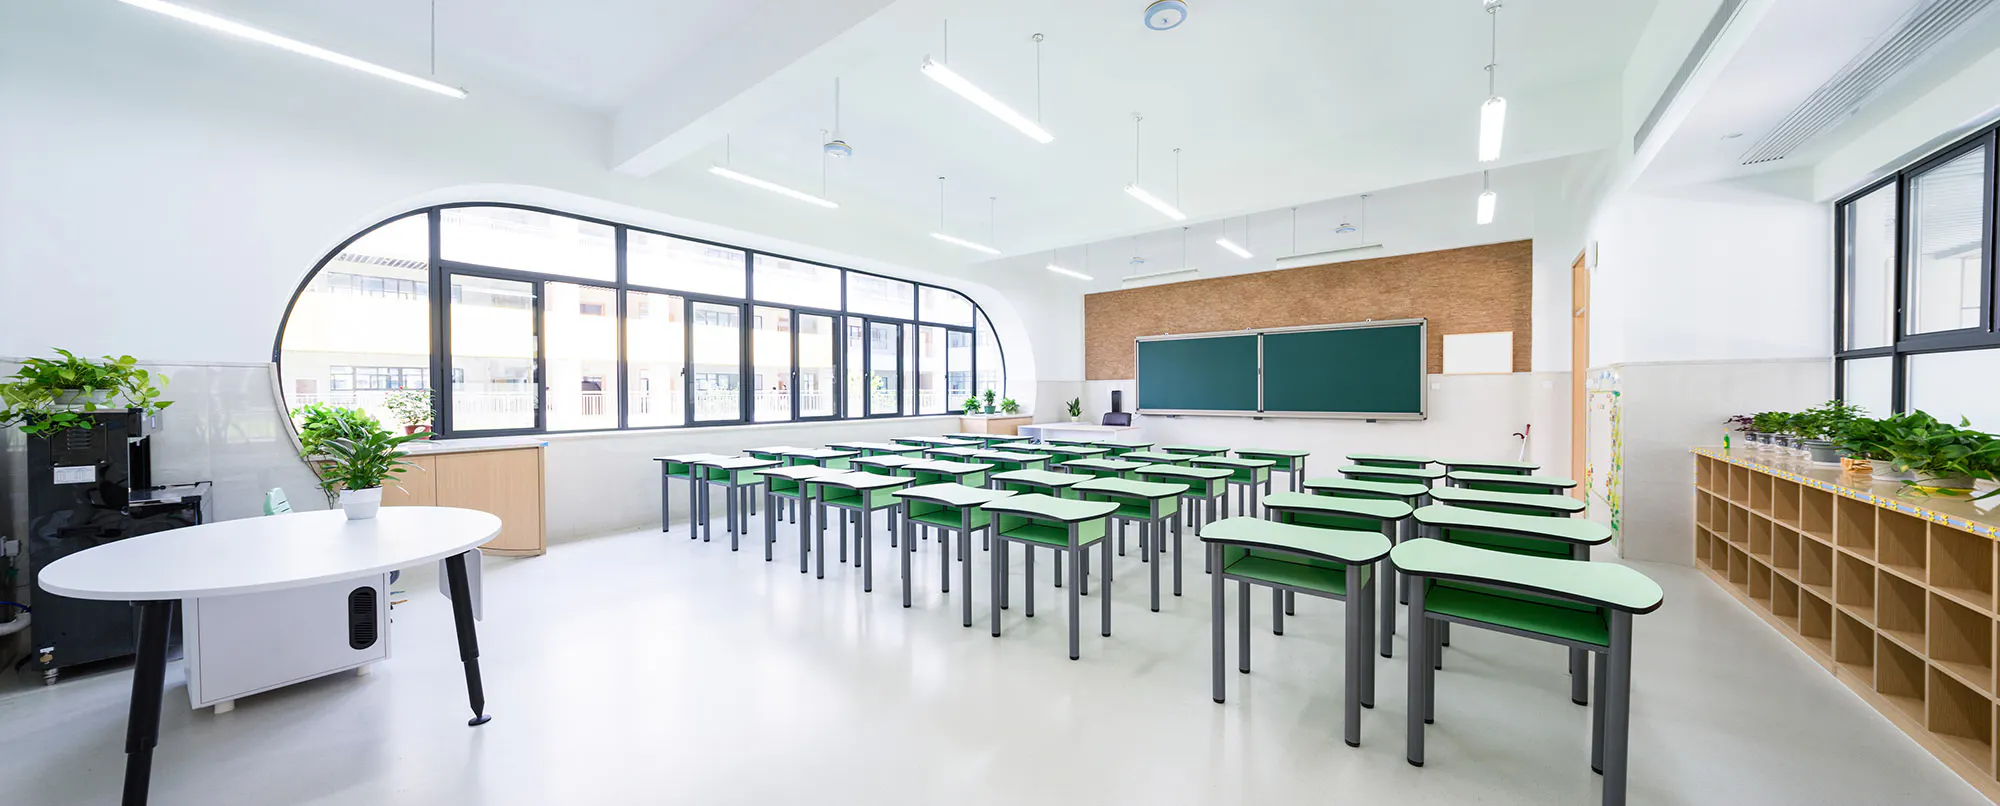 Education Janitorial Services